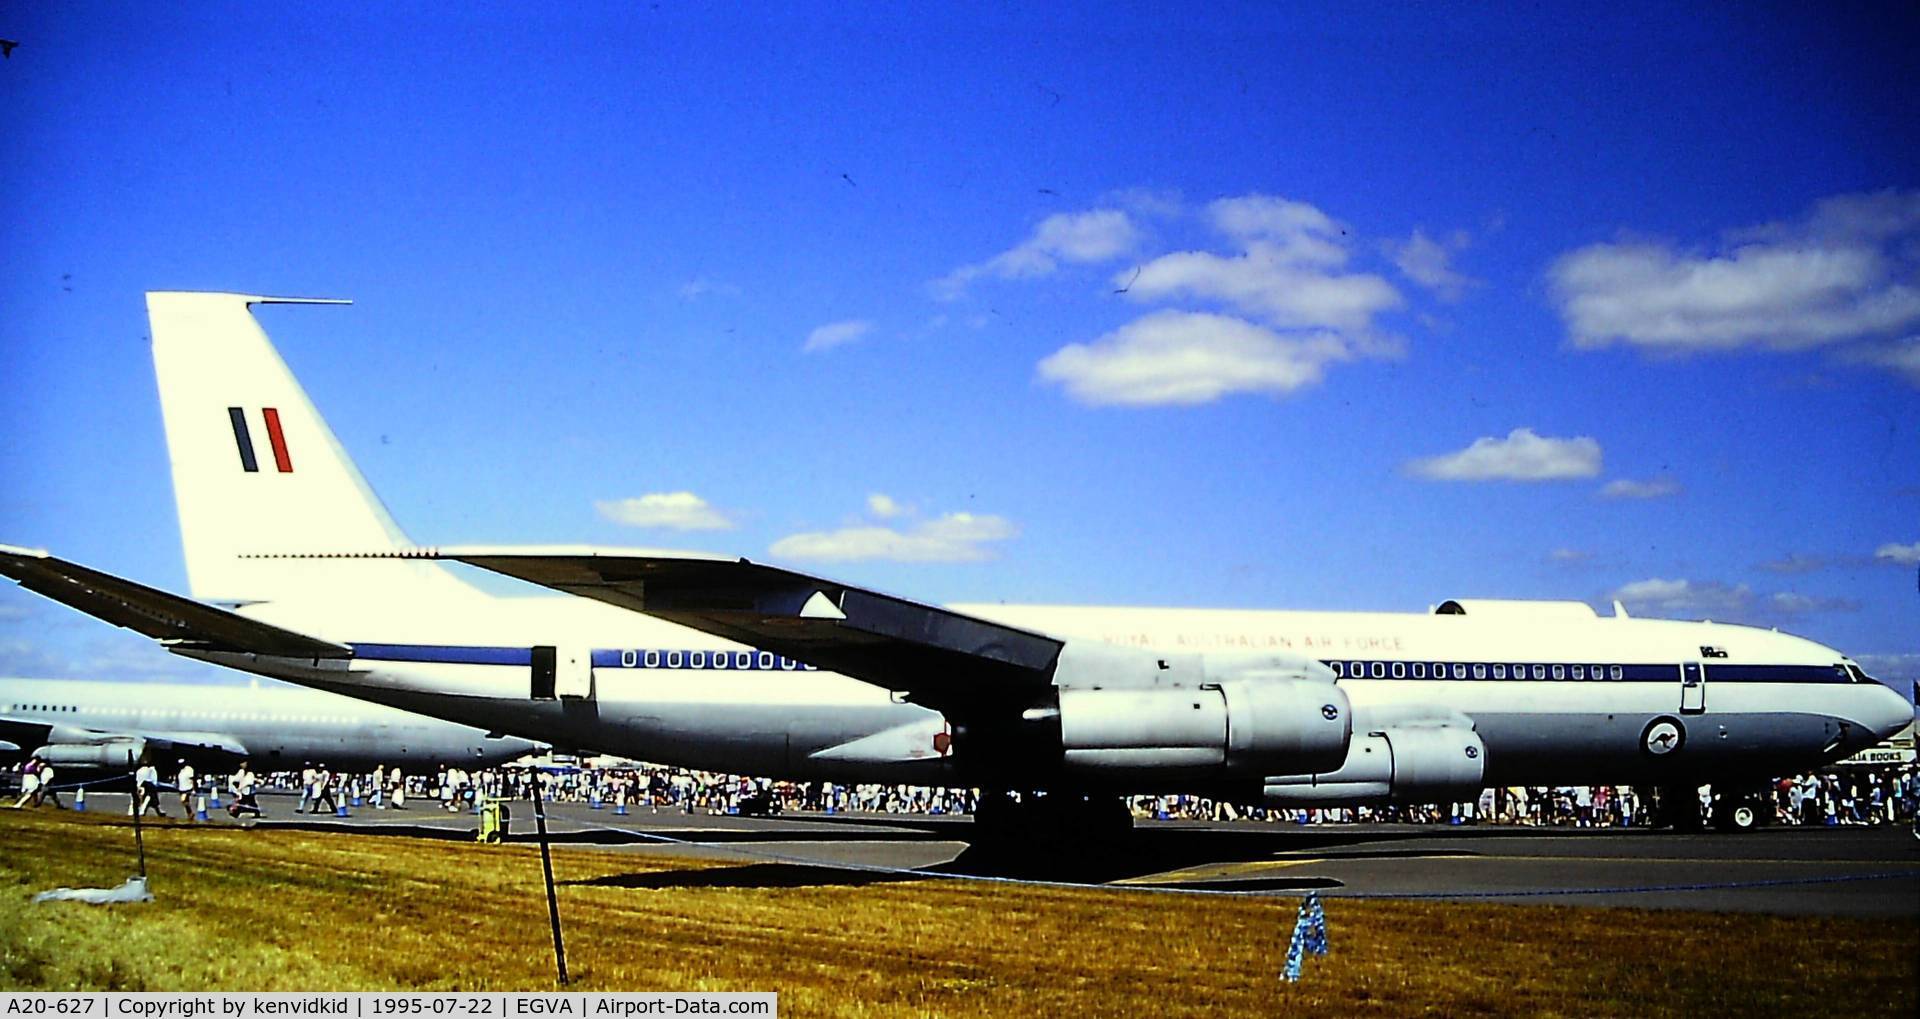 A20-627, 1968 Boeing 707-338C C/N 19627, At the 1995 Fairford International Air Tattoo, scanned from slide.